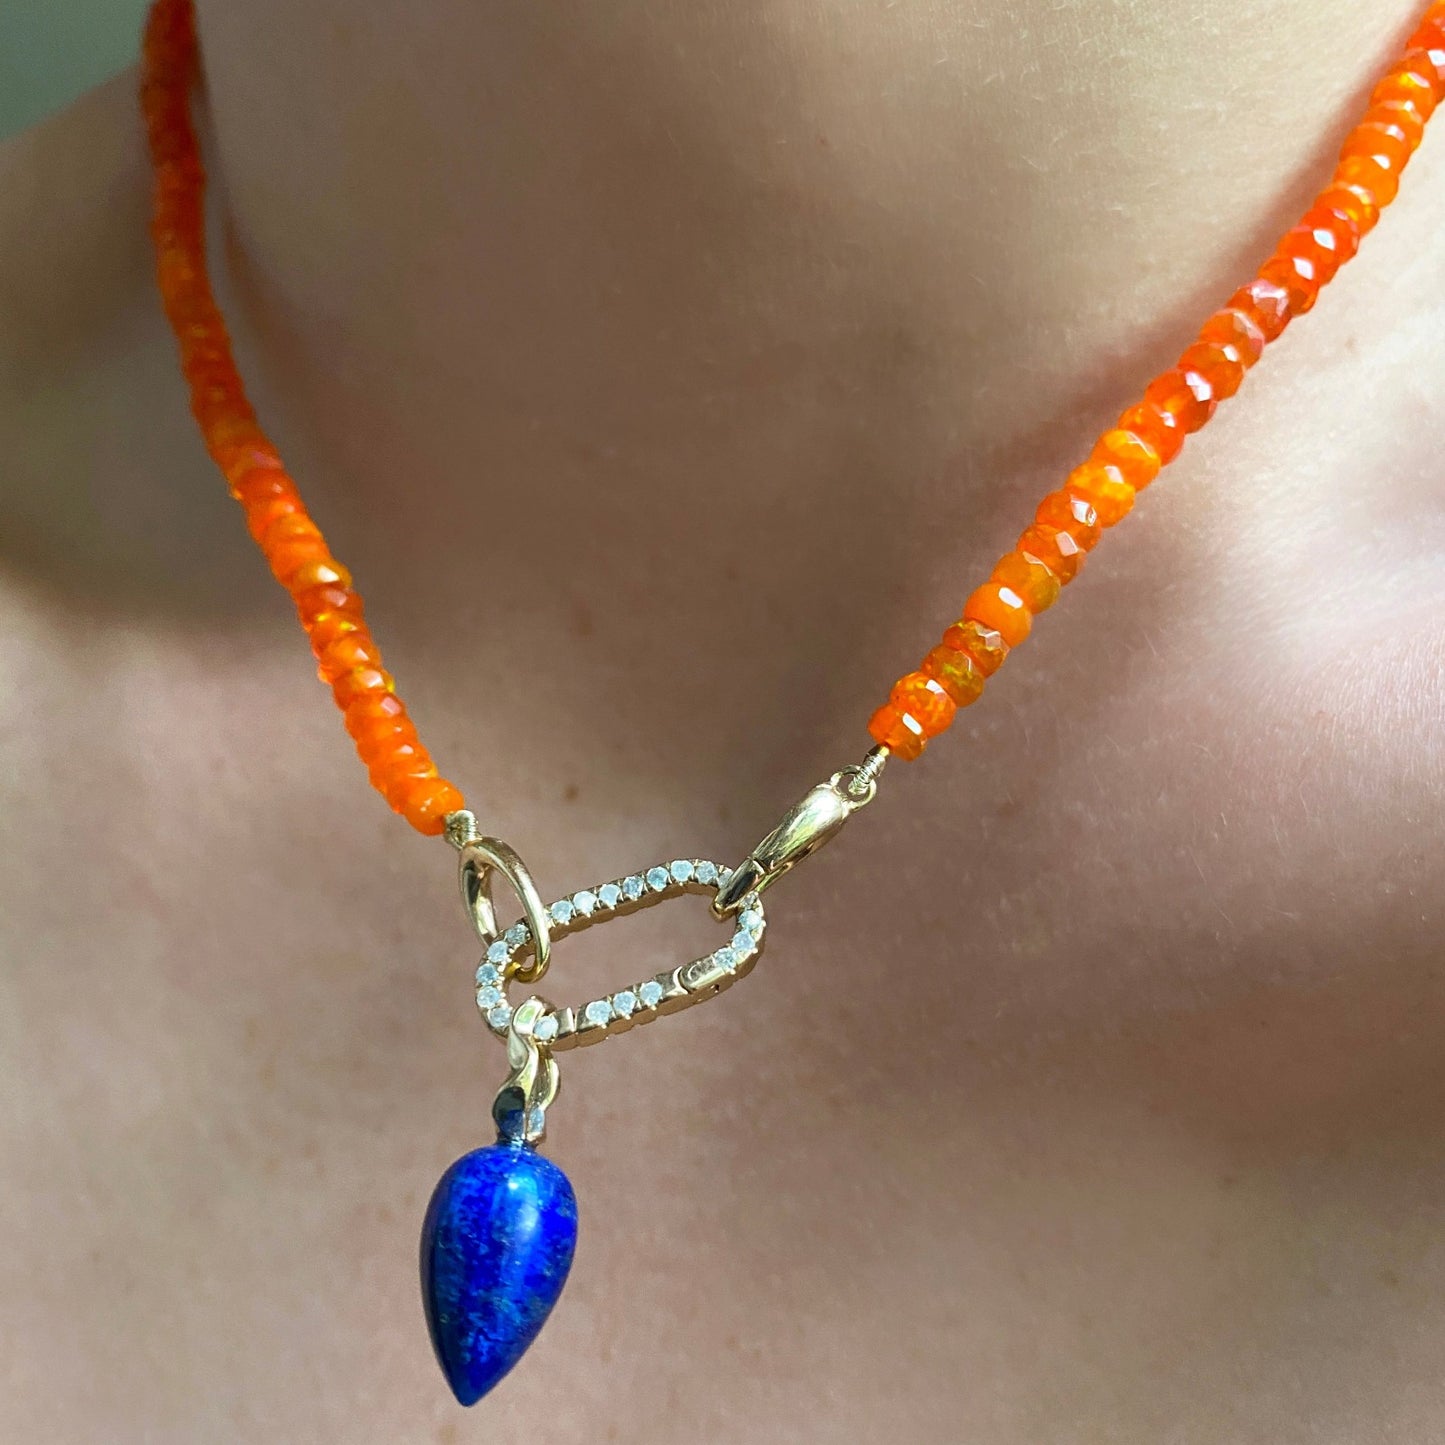 Lapis acorn drop charm. Styled on a neck hanging from a oval charm lock and beaded necklace.